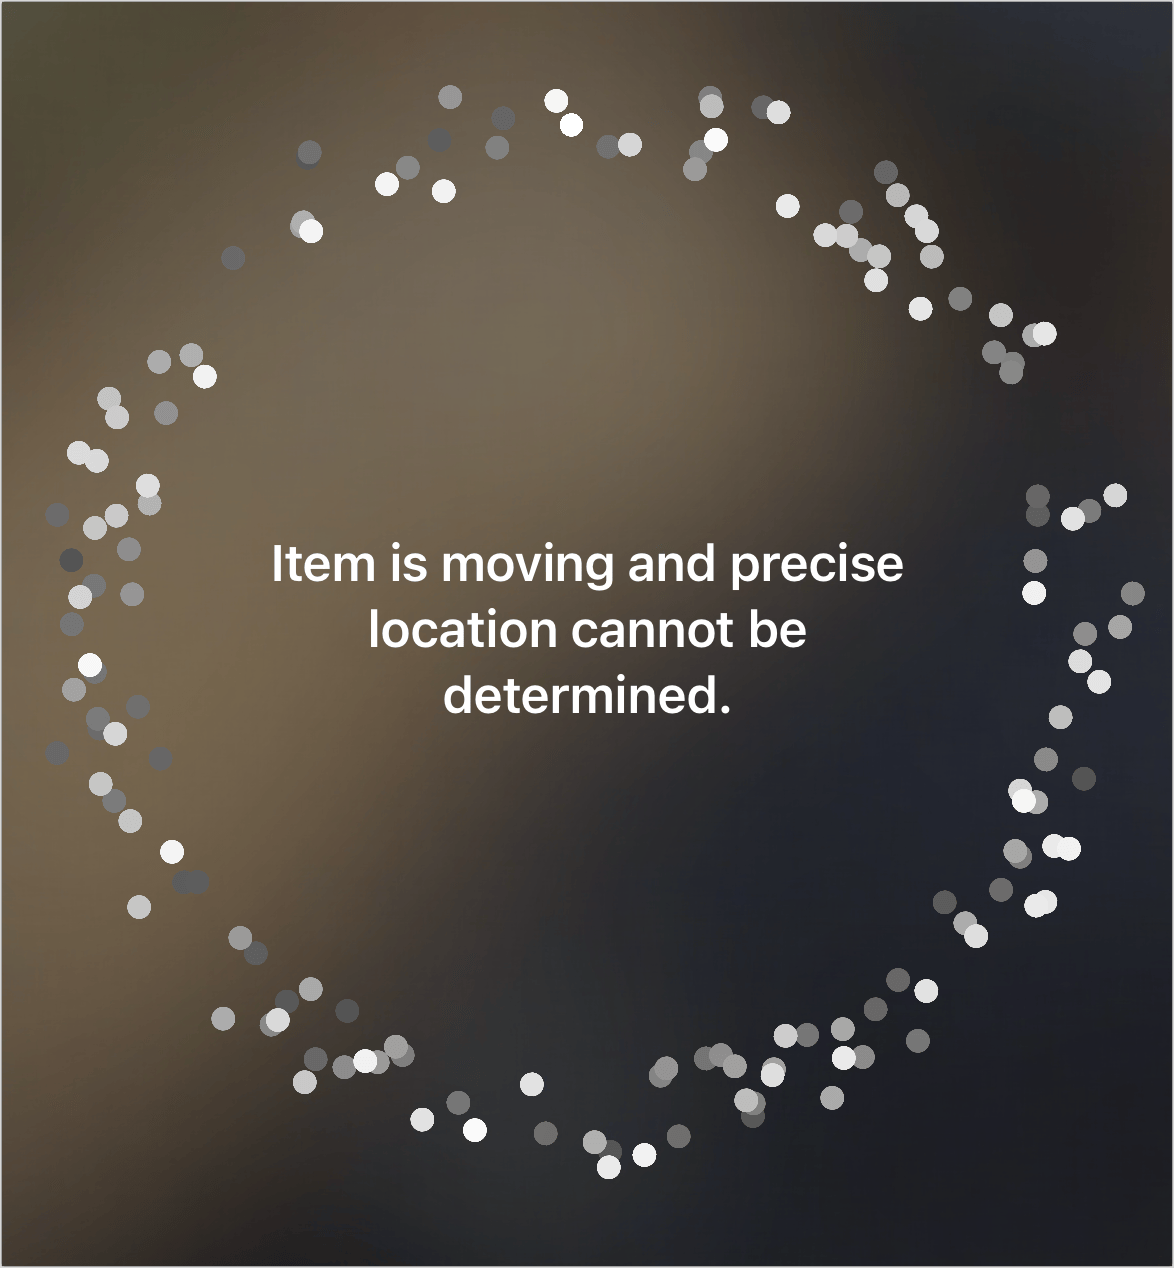 Figure 43: An item can’t be tracked precisely when moving.